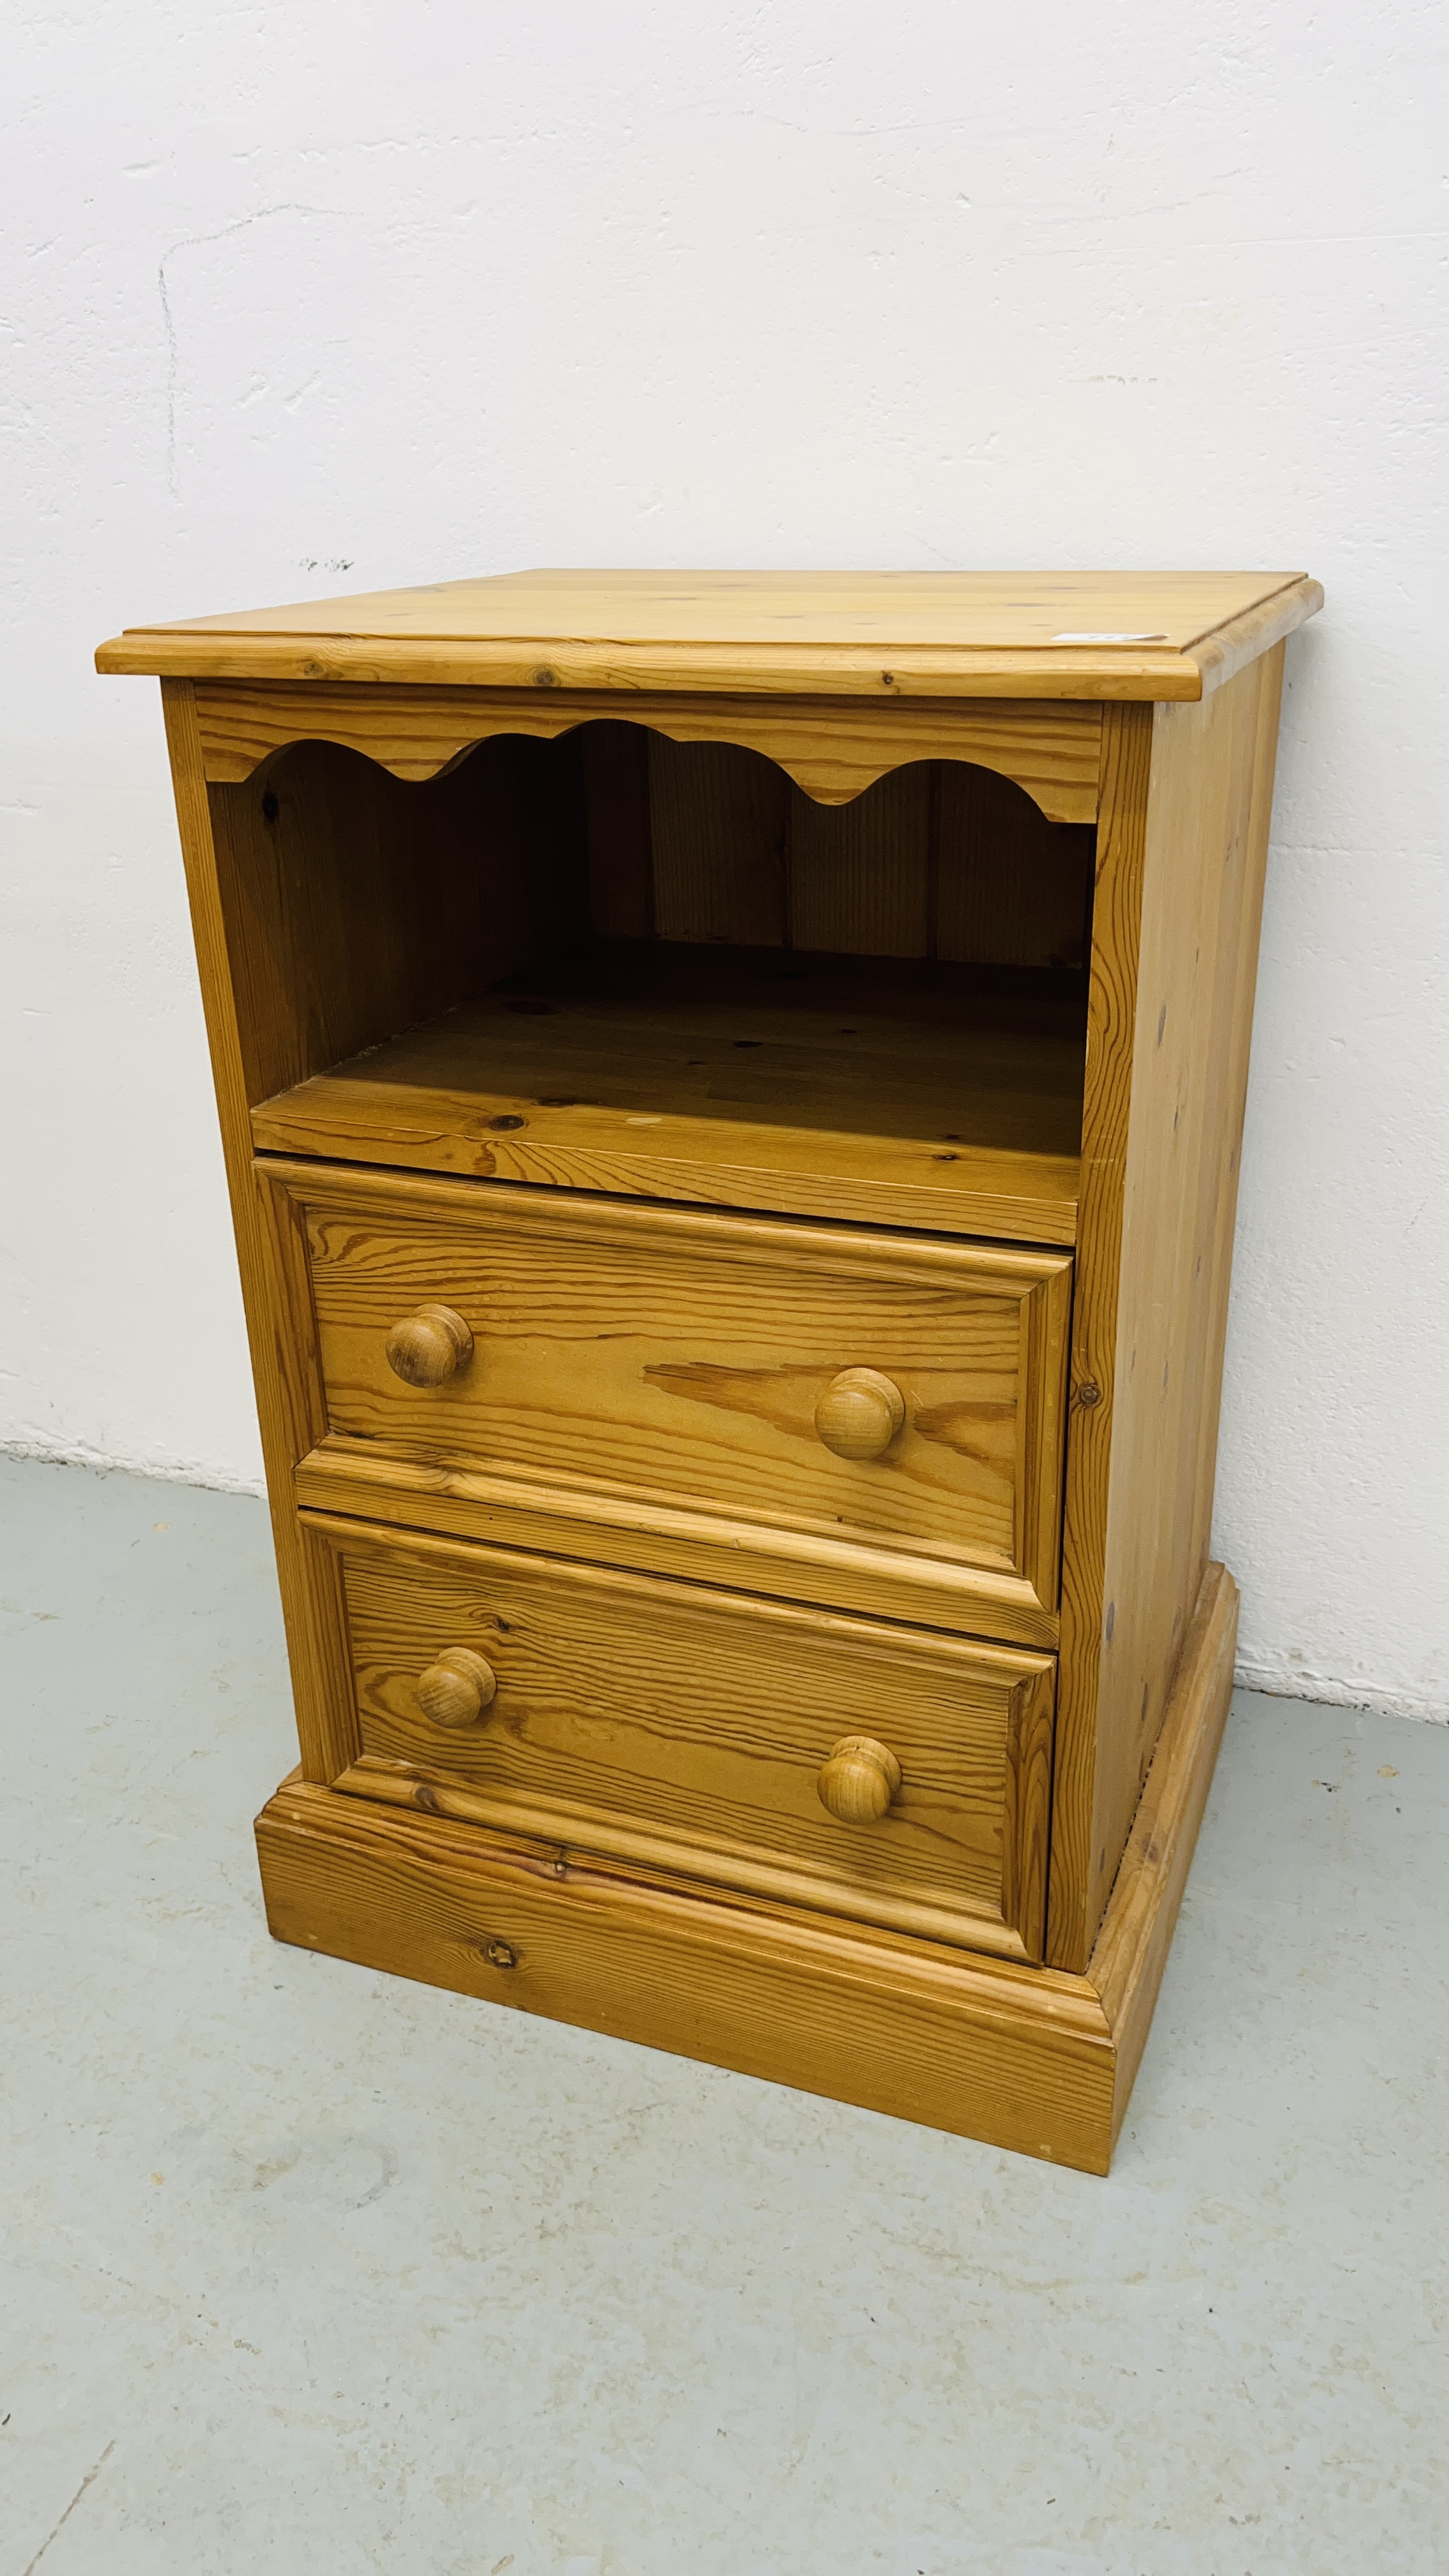 A WAXED PINE TWO DRAWER BEDSIDE CABINET WIDTH 45CM. DEPTH 38CM. HEIGHT 67CM.